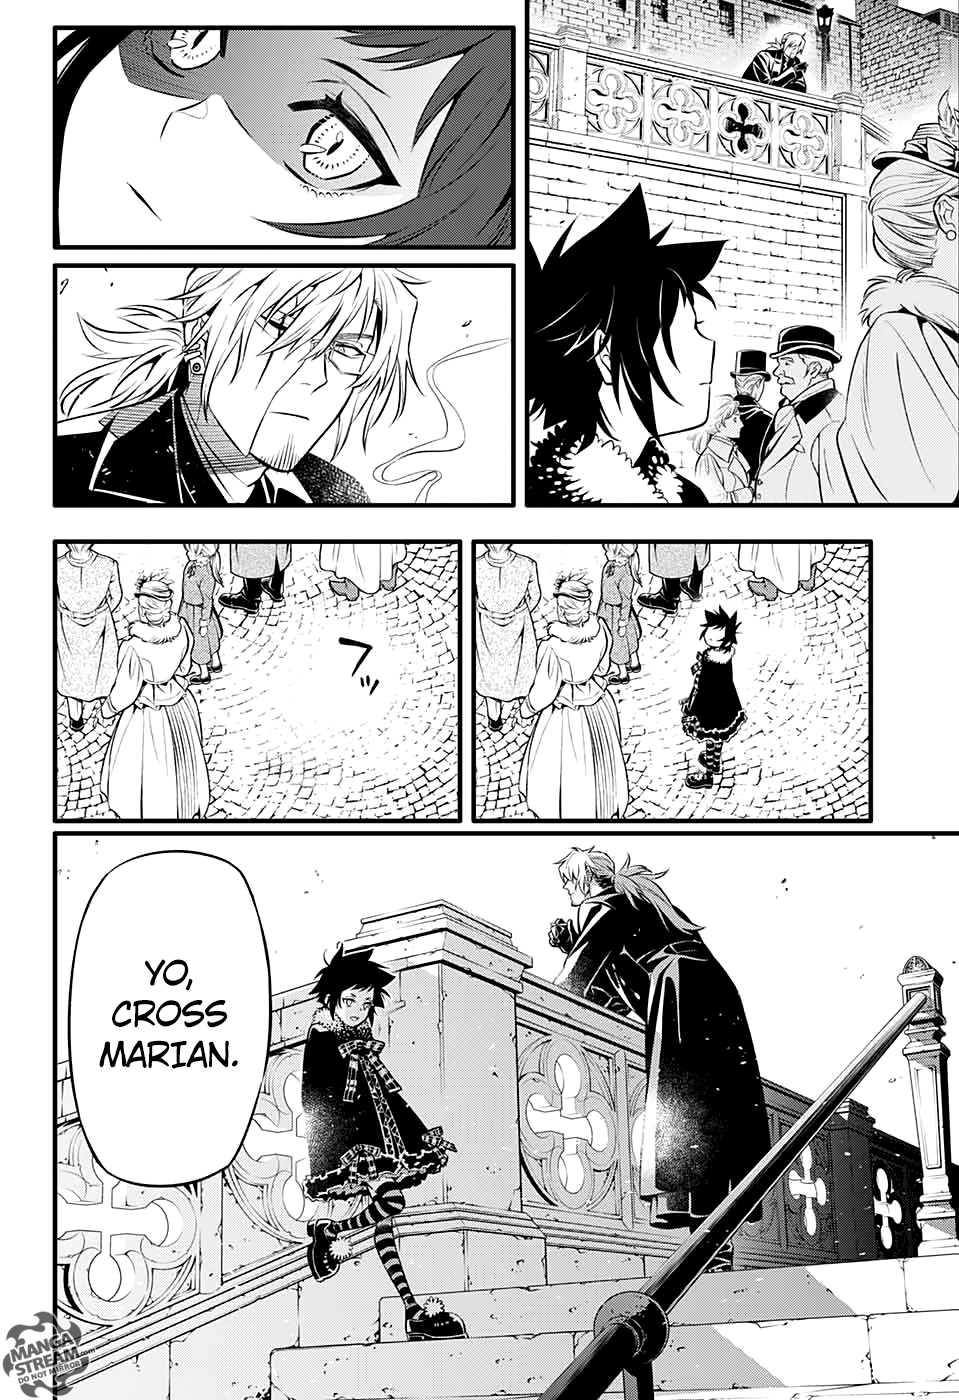 D.Gray-man chapter 234 page 10